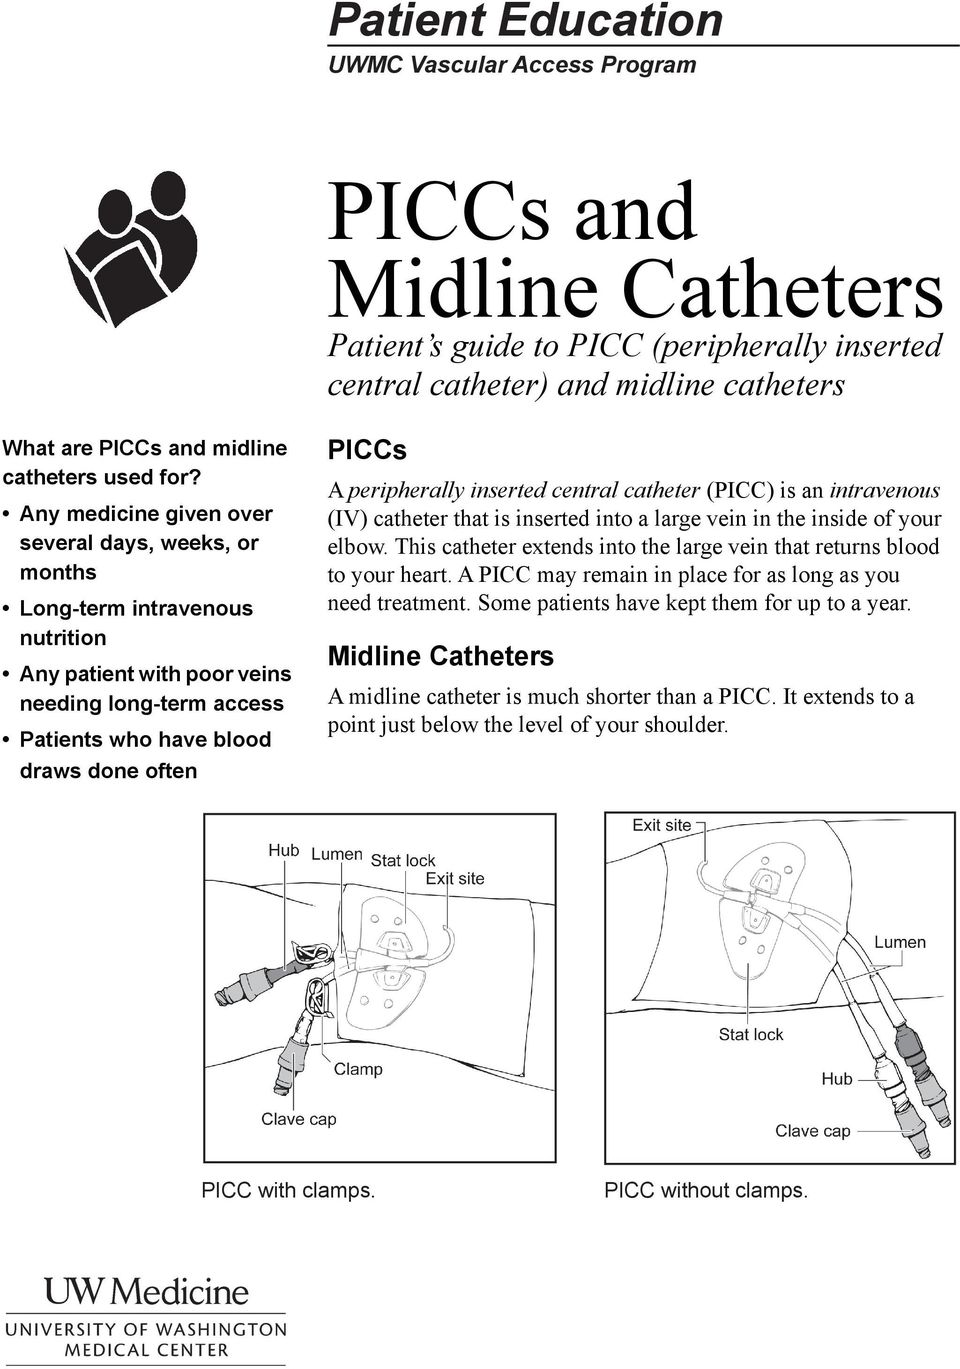 peripherally inserted central catheter (PICC) is an intravenous (IV) catheter that is inserted into a large vein in the inside of your elbow.